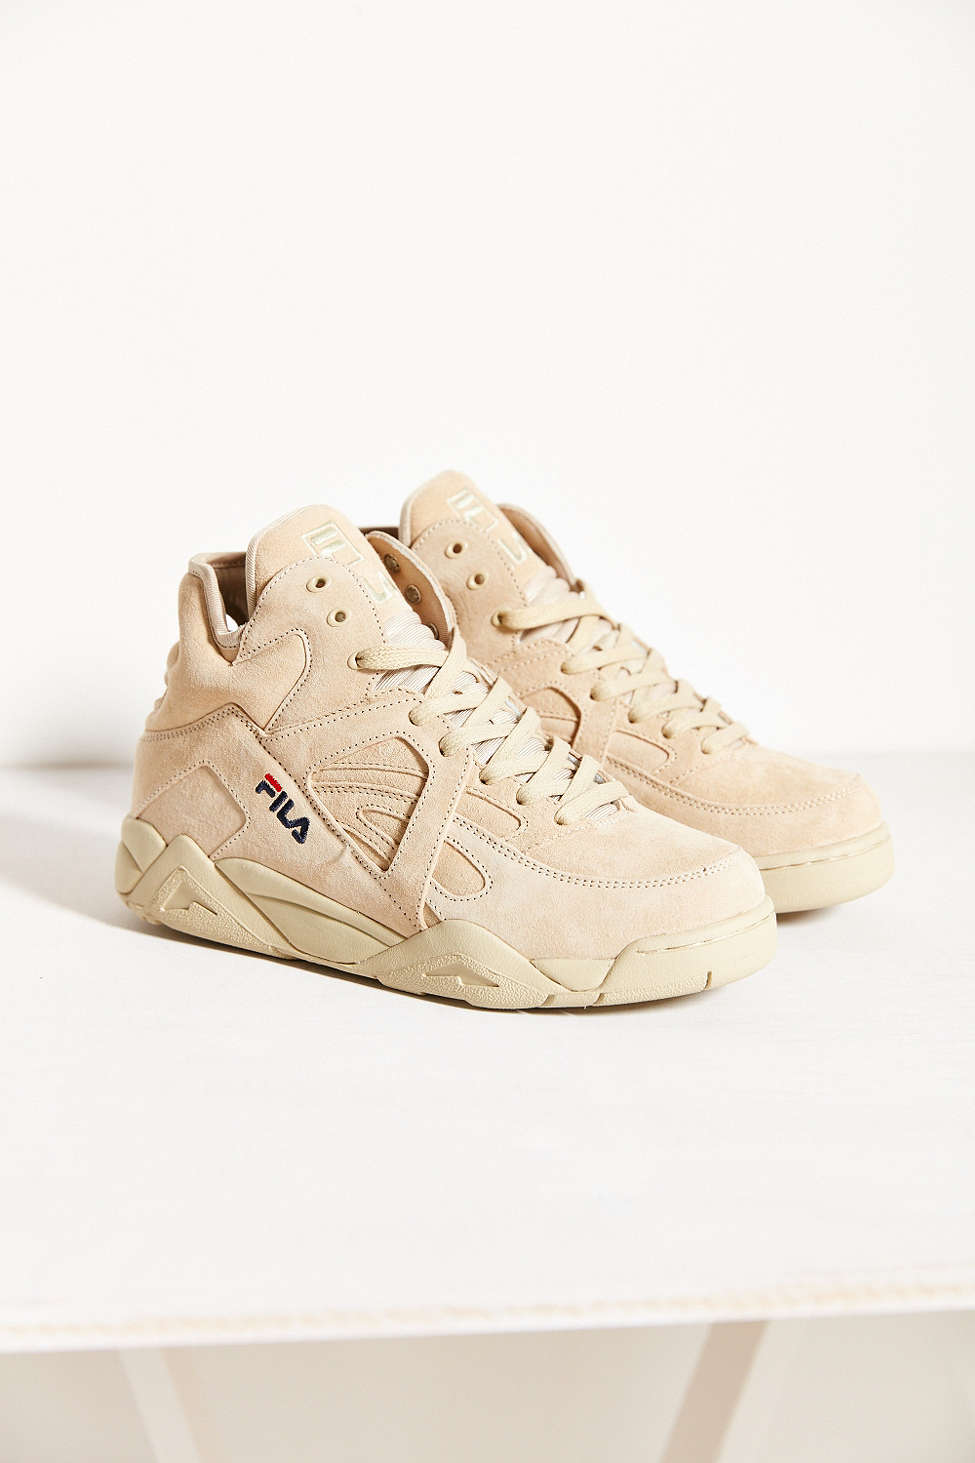 urban outfitters fila cage cream 4